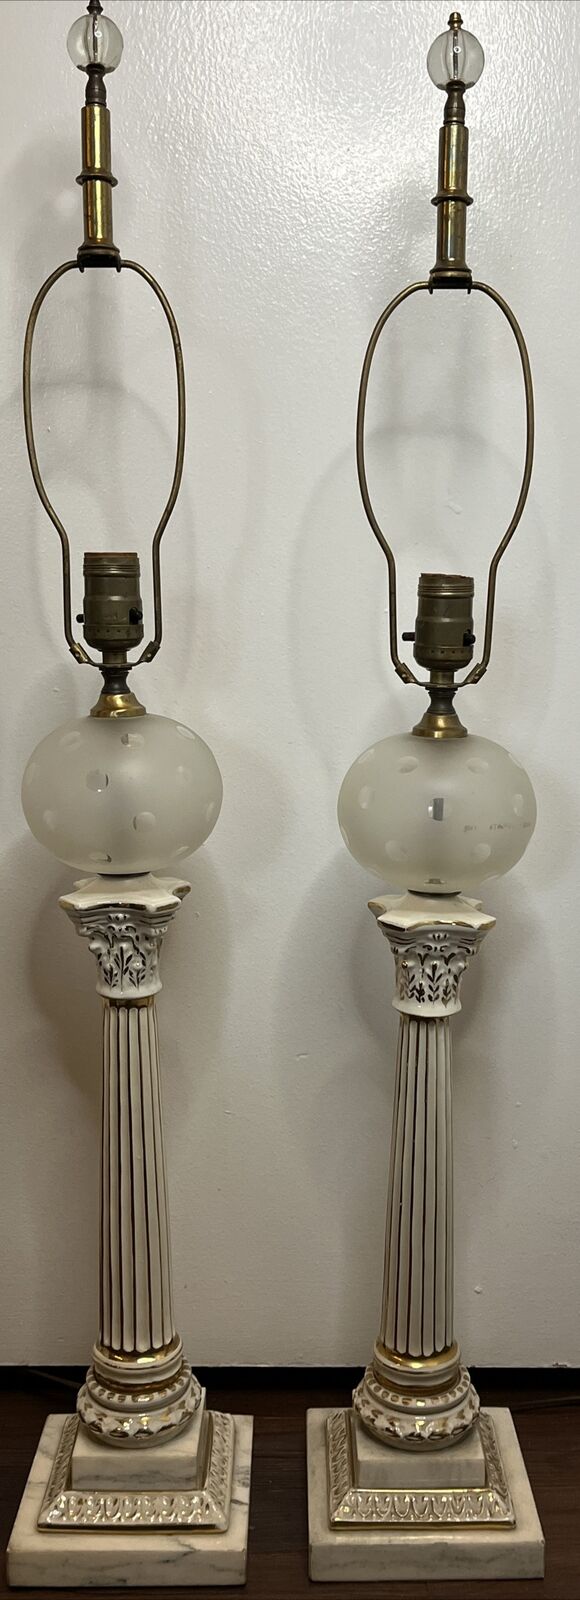 Pair of Vintage Italian Marble-Based Porcelain Coin-Spot Table Lamps